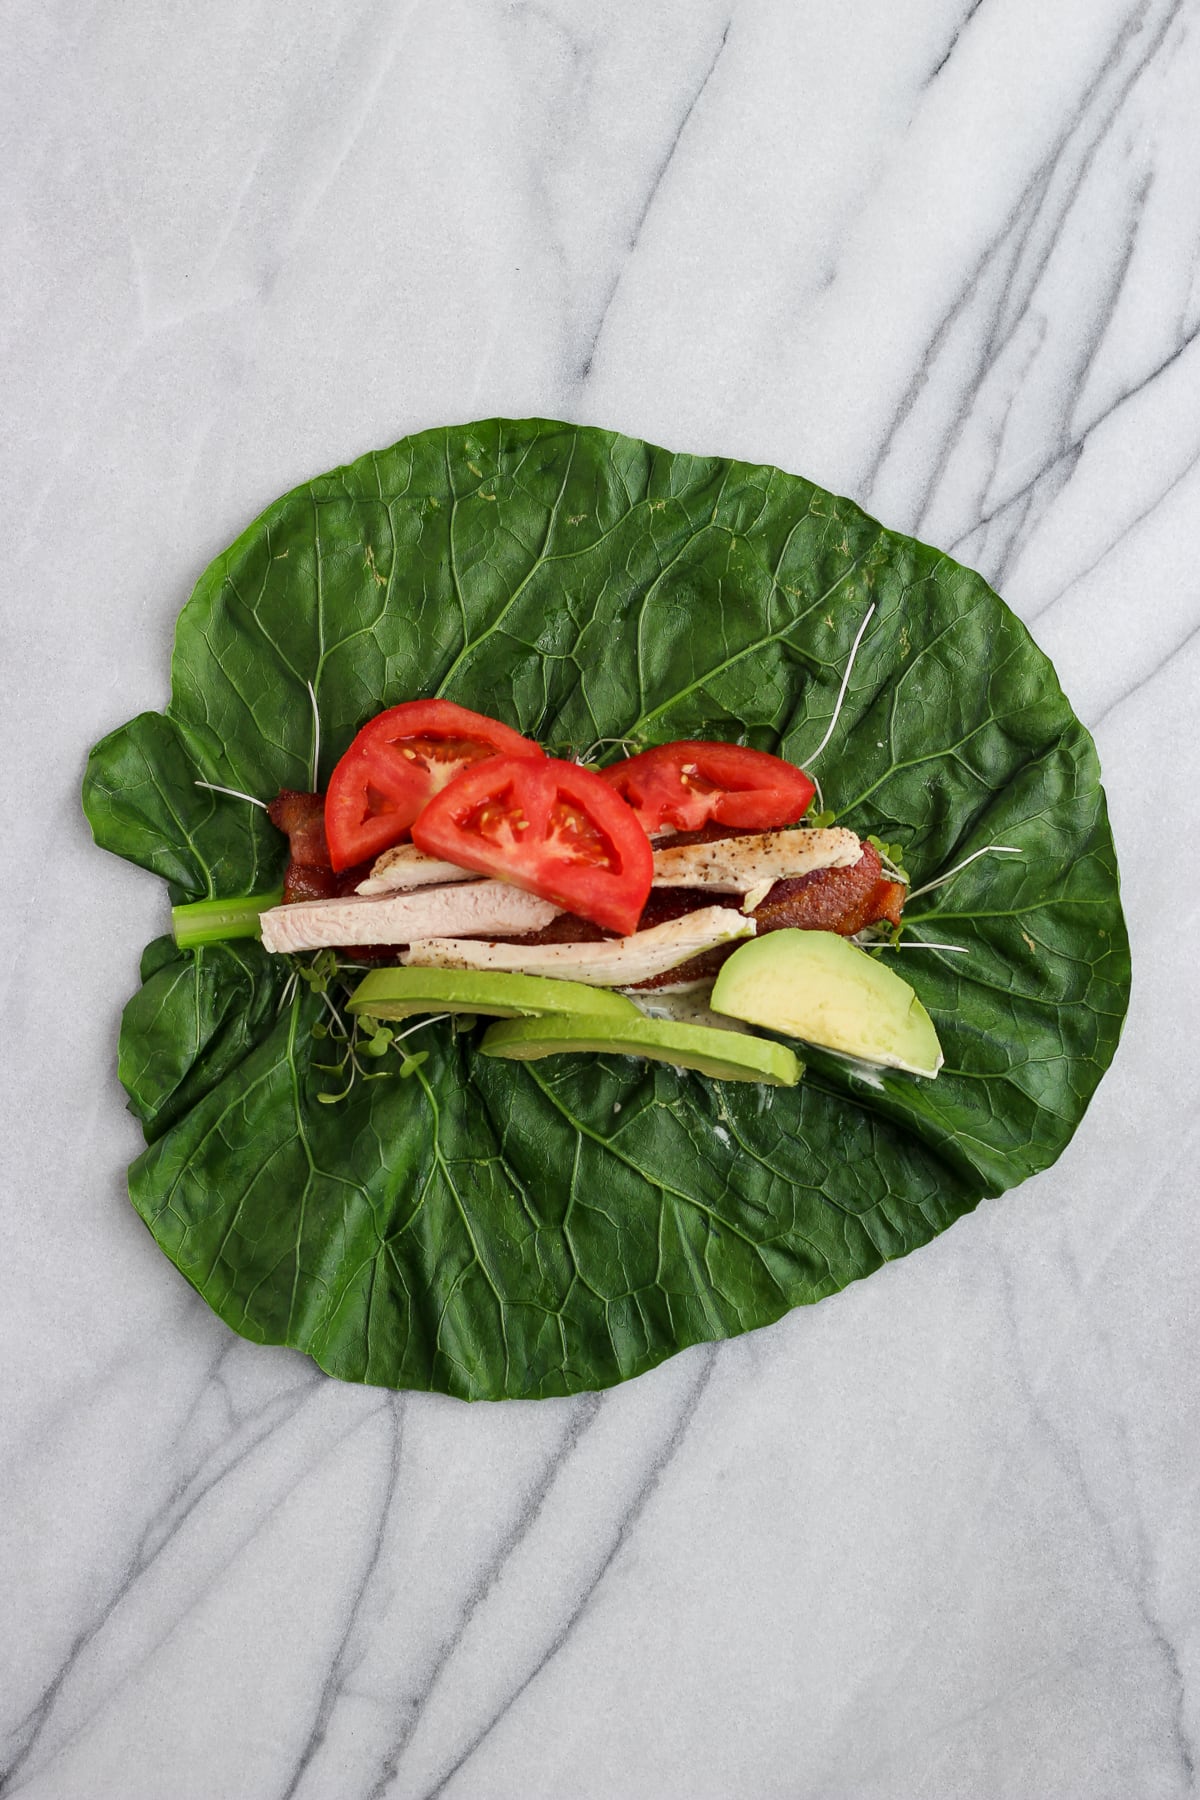 A collard green leaf with filling ingredients added to the middle.